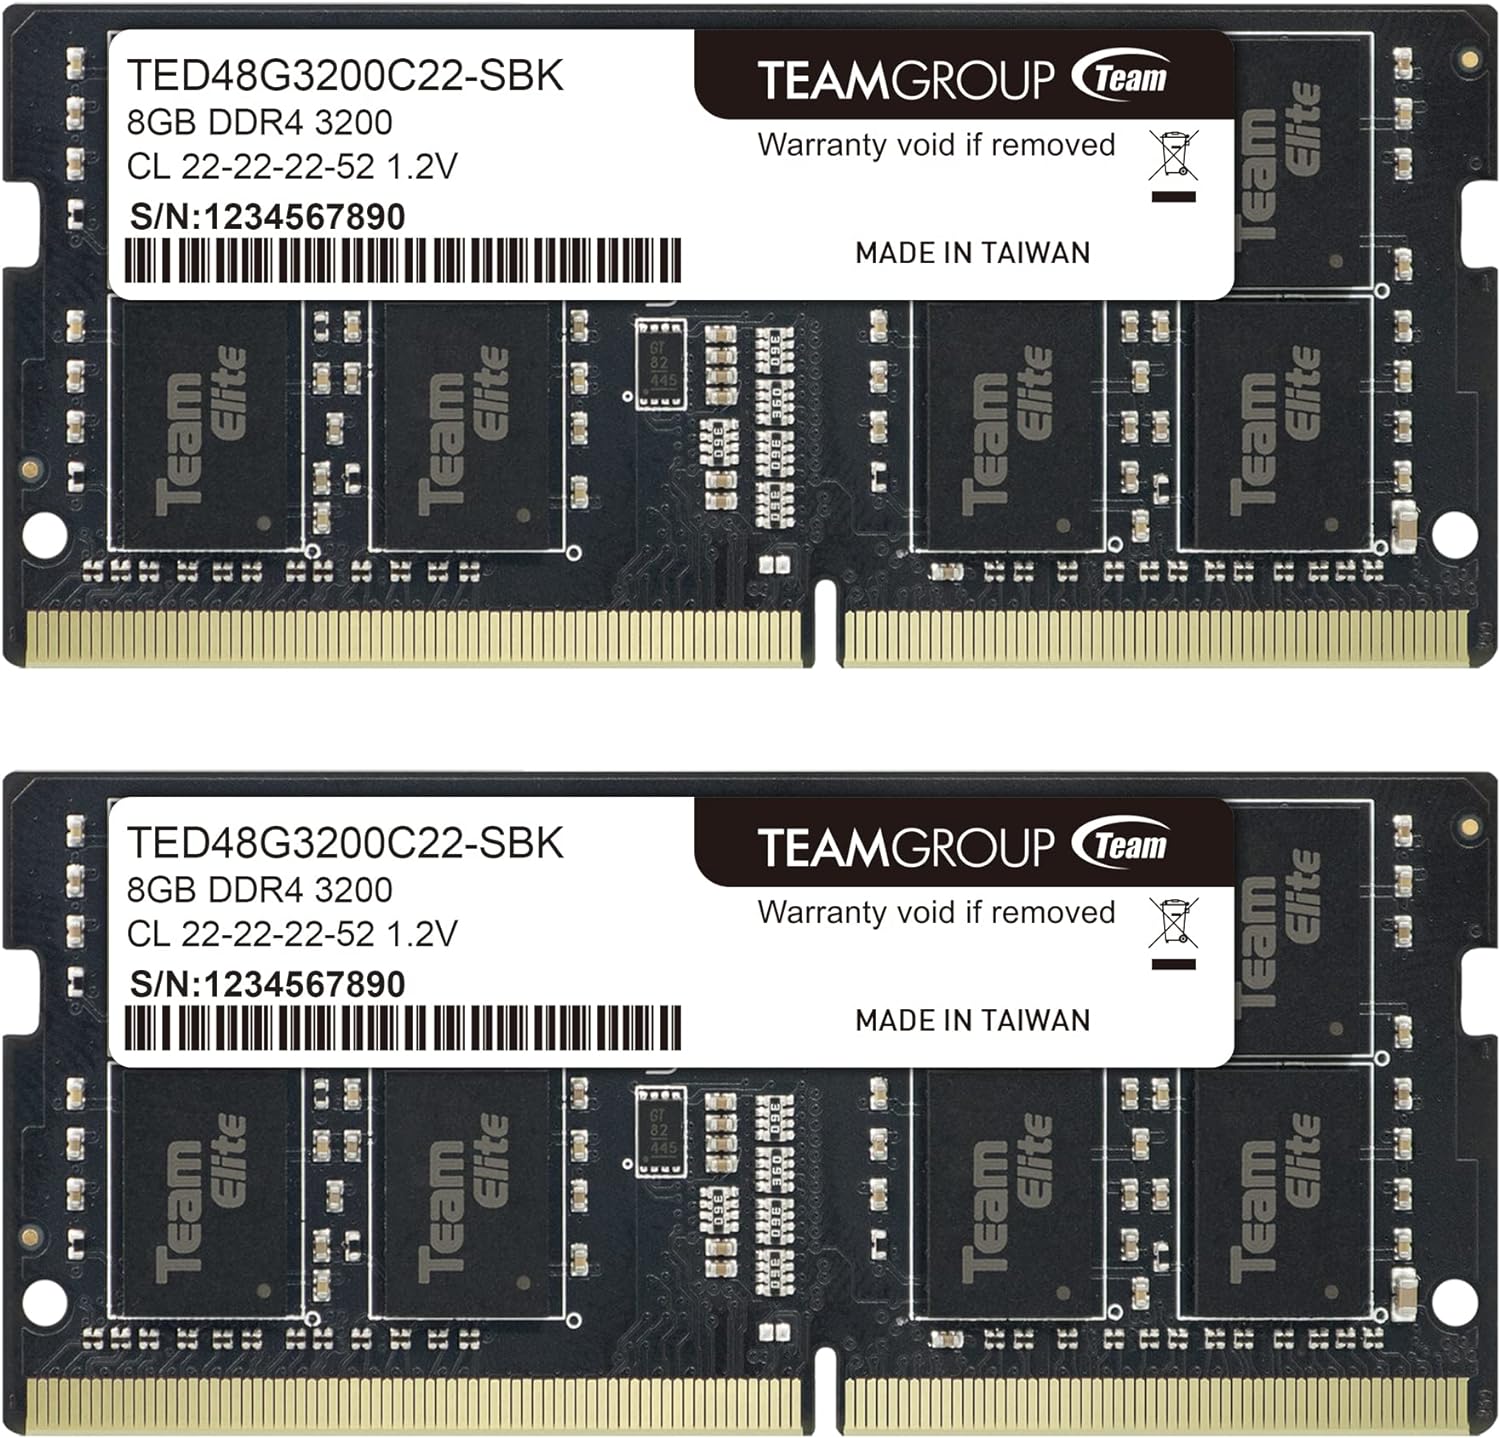 TEAMGROUP Elite DDR4 32GB Kit (2 x 16GB) 3200MHz PC4-25600 CL22 (2933MHz or 2666MHz)Unbuffered Non-ECC 1.2V SODIMM 260-Pin Laptop Notebook PC Computer Memory Module Ram Upgrade - TED432G3200C22DC-S01